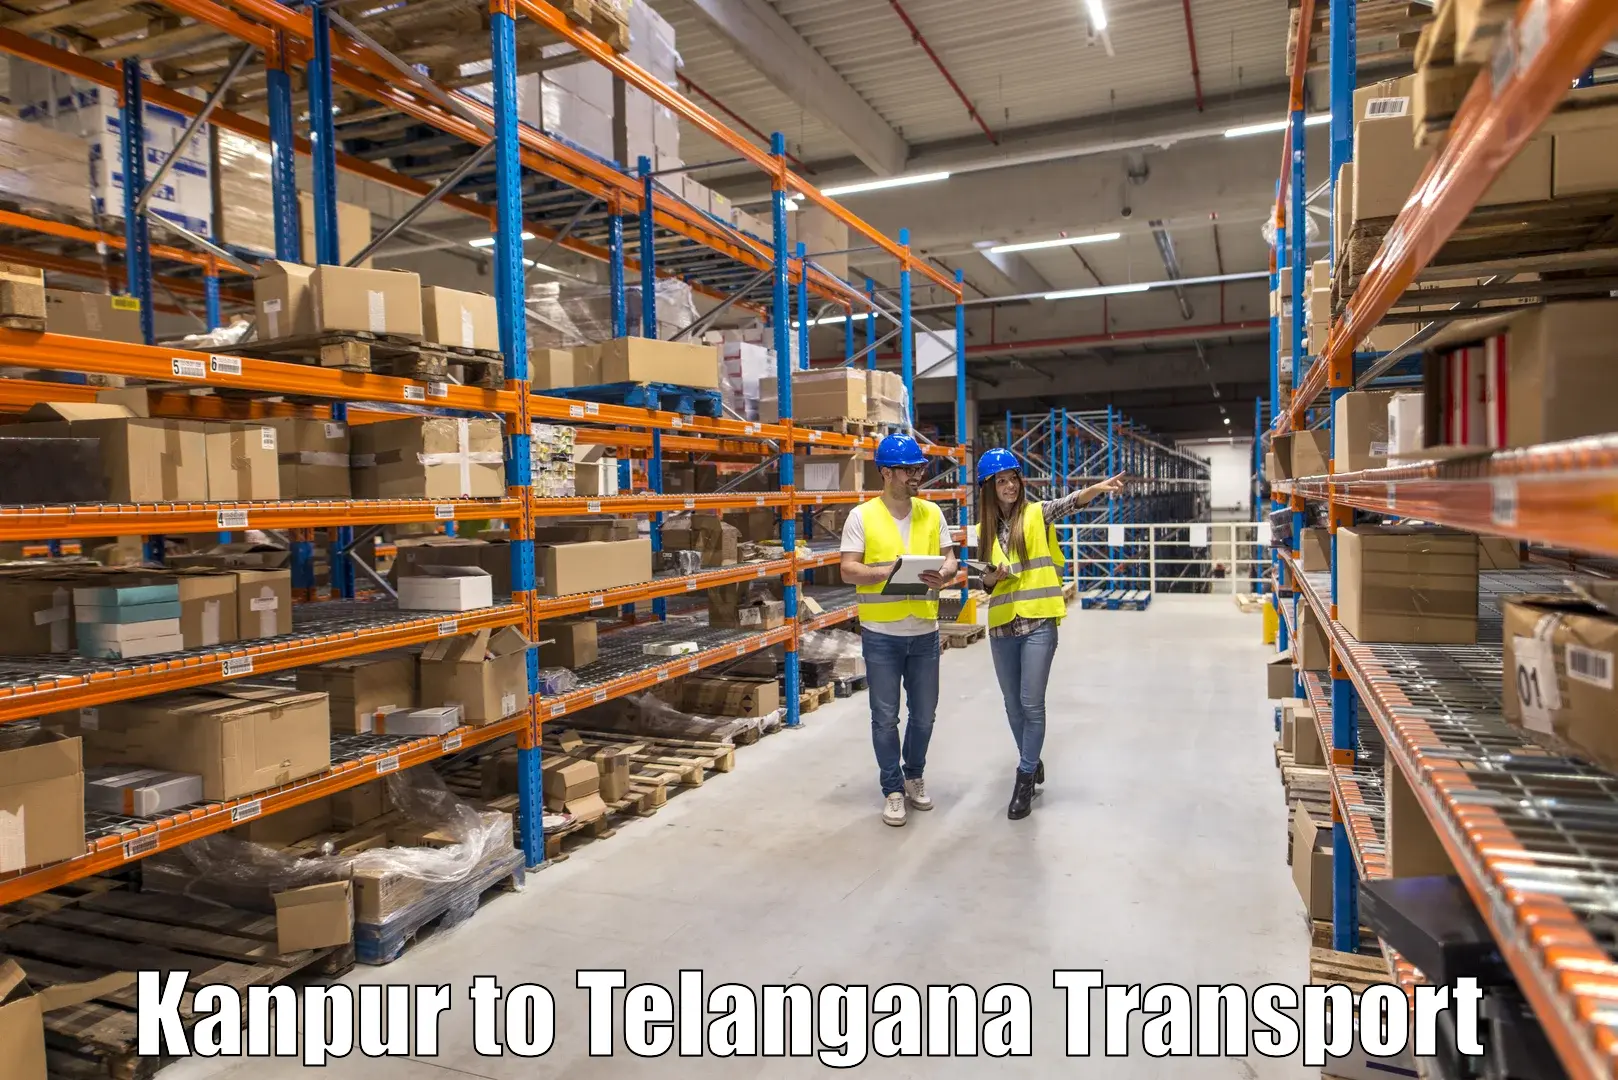 Container transport service Kanpur to Rudrangi